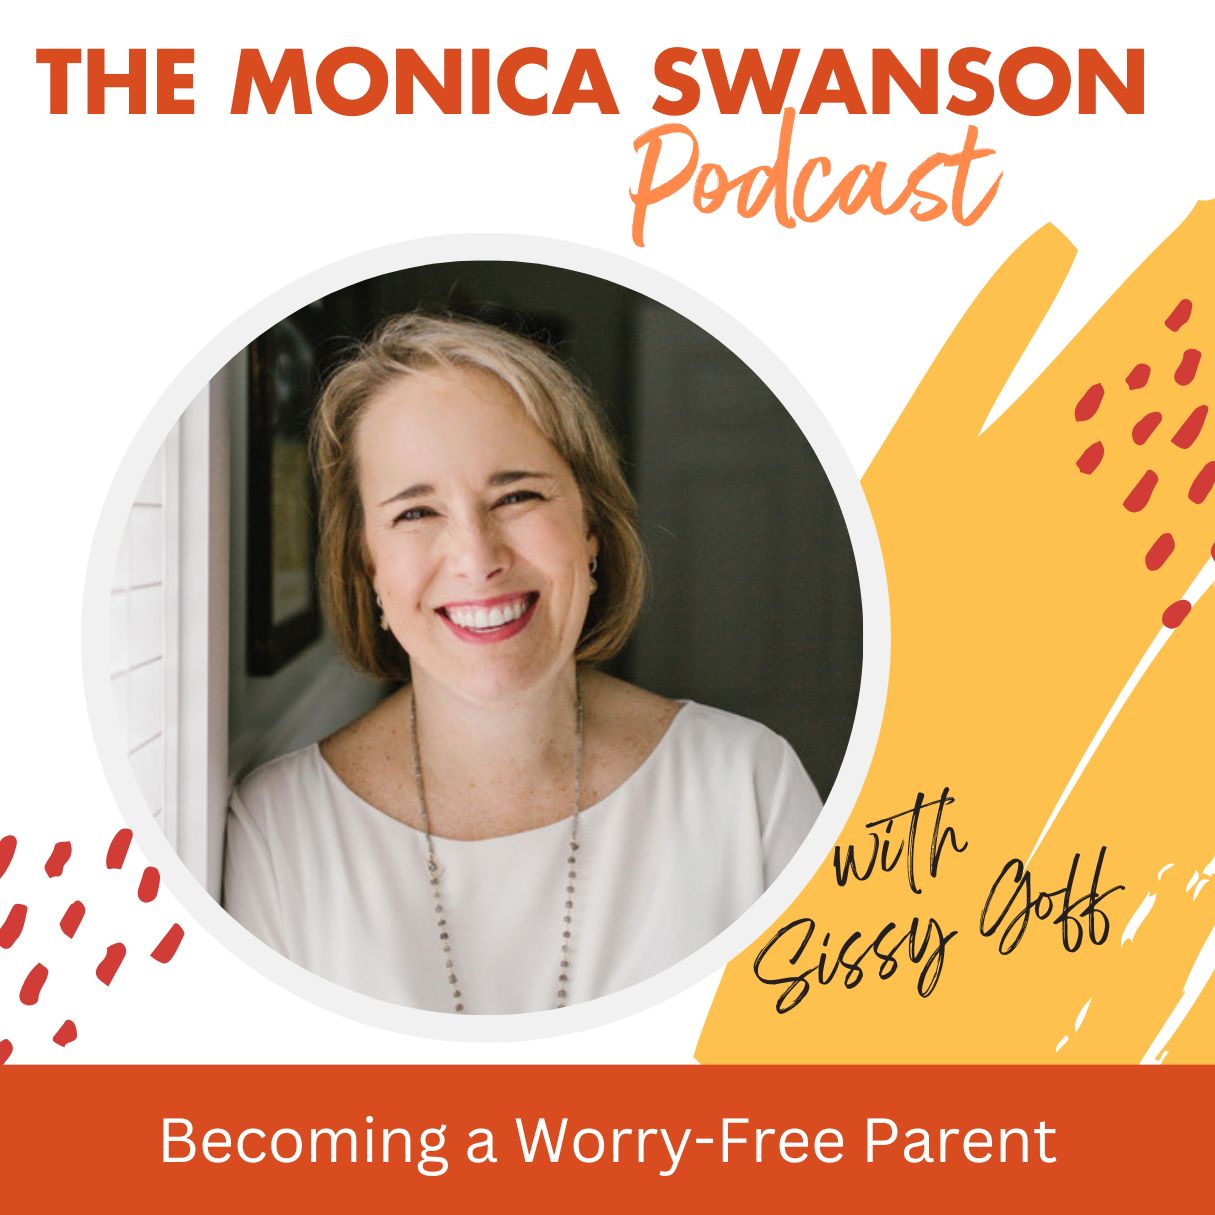 Becoming a Worry-Free Parent, with Sissy Goff